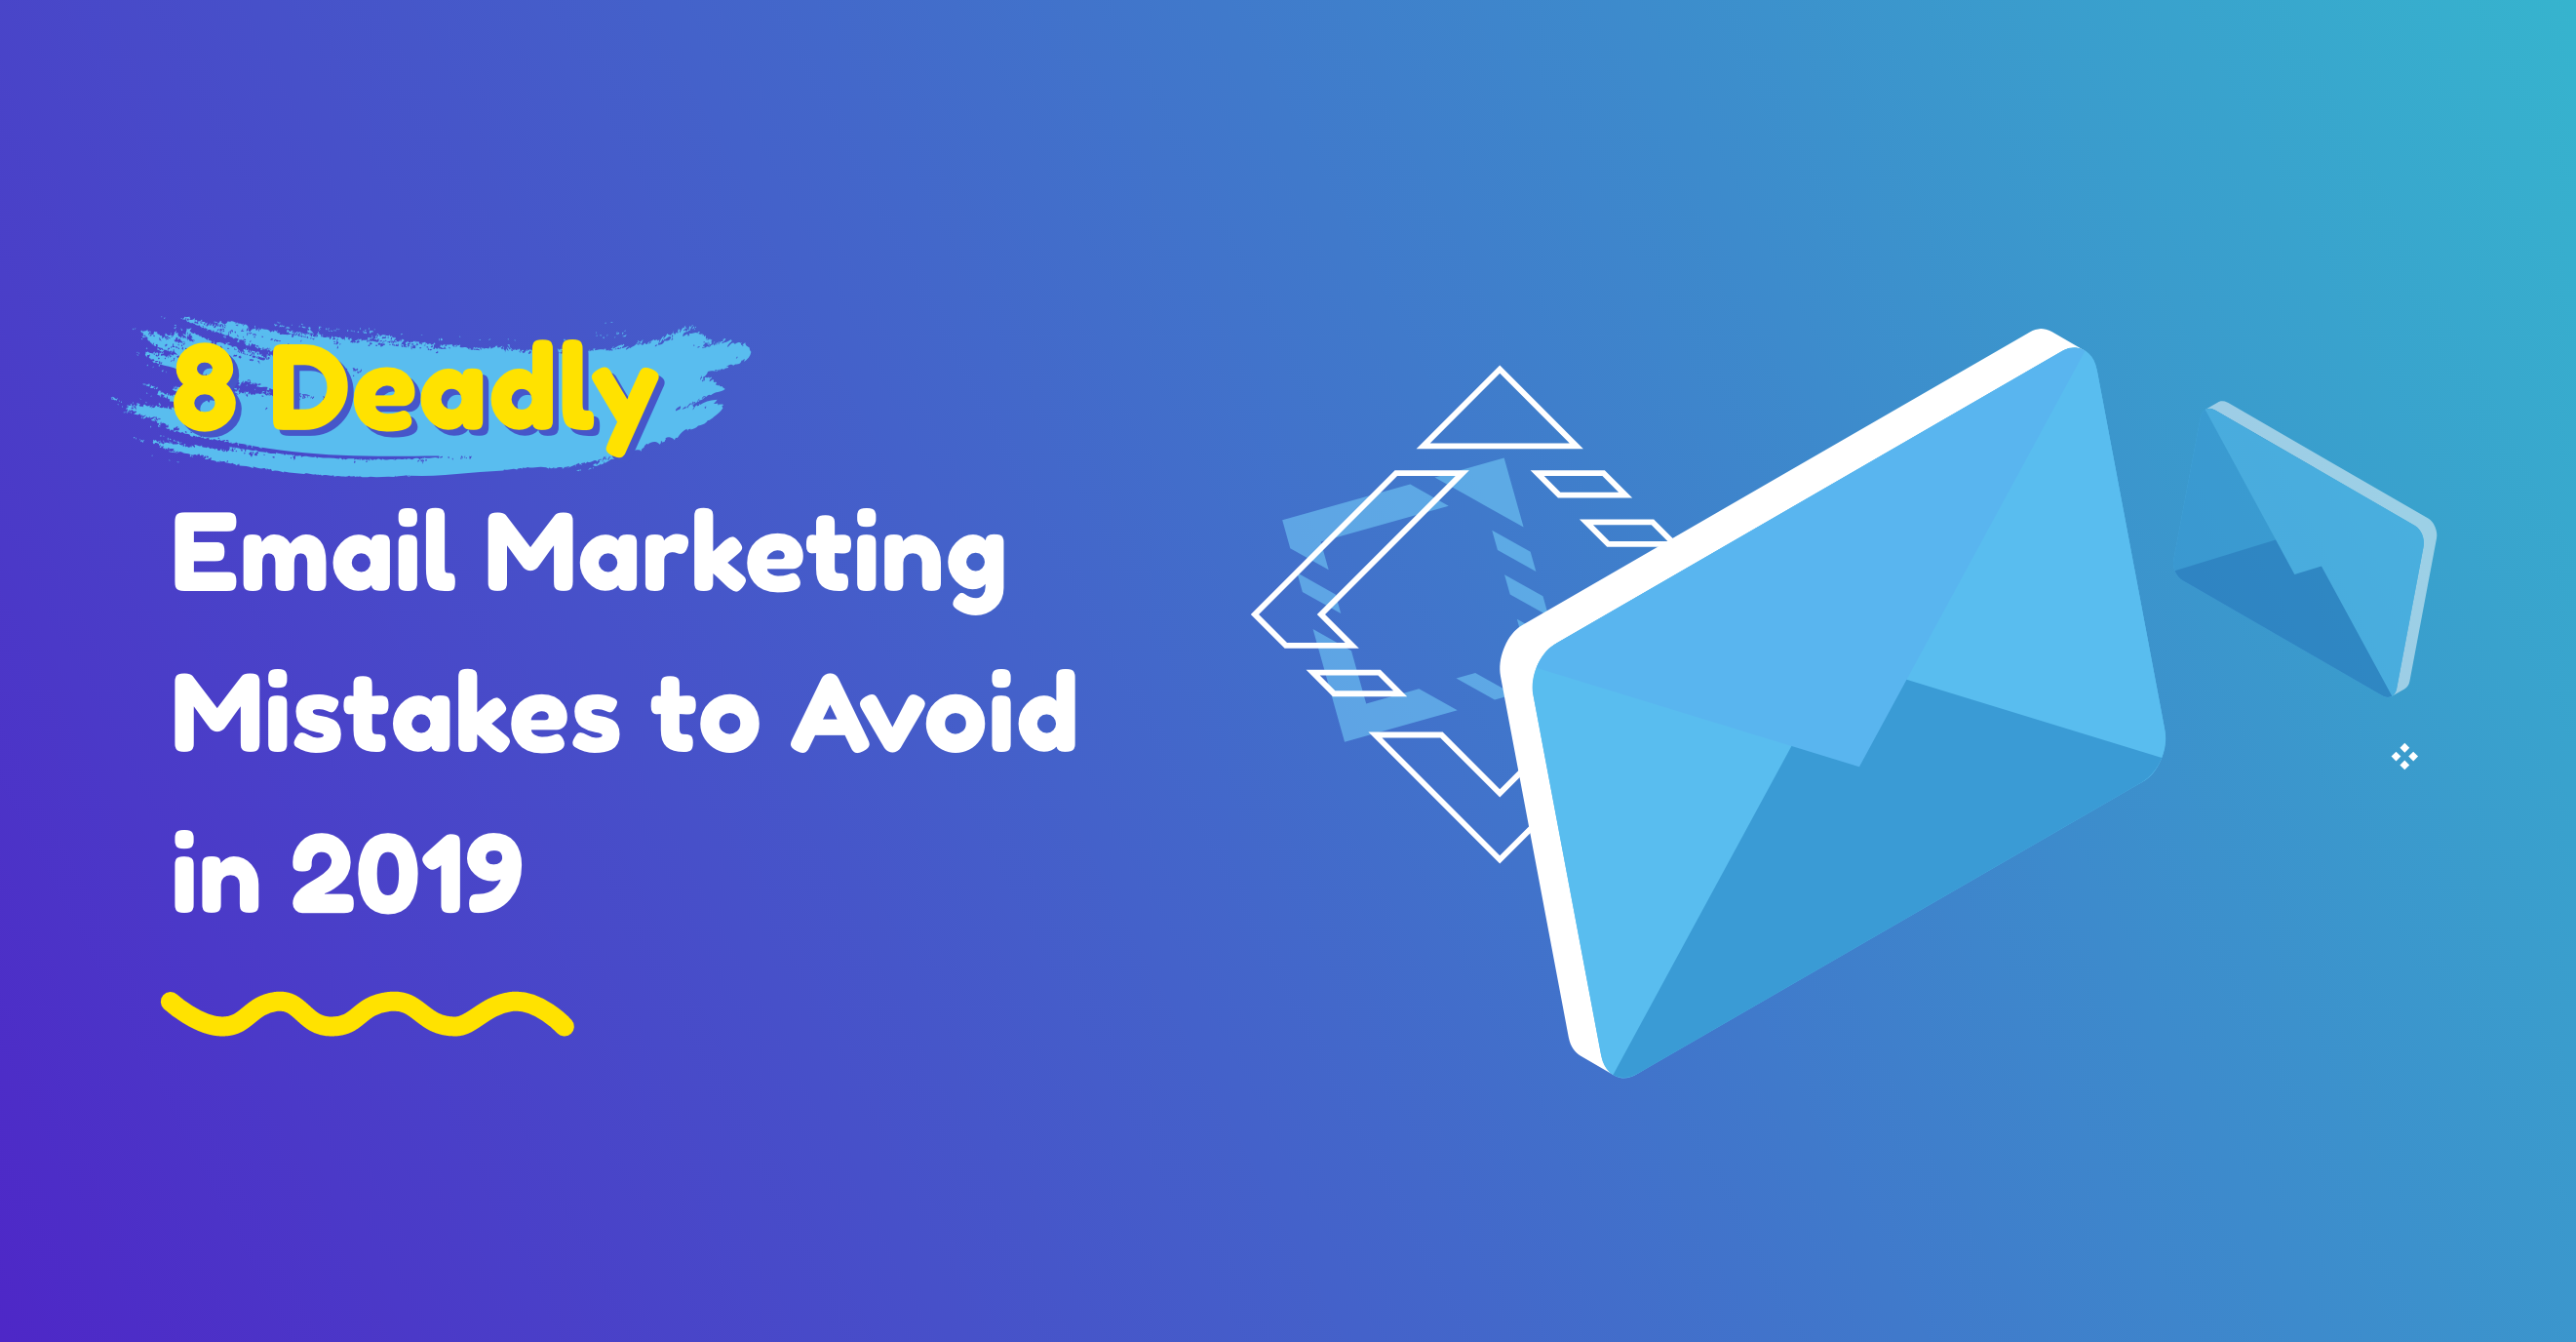 8 Deadly Email Marketing Mistakes to Avoid in 2019